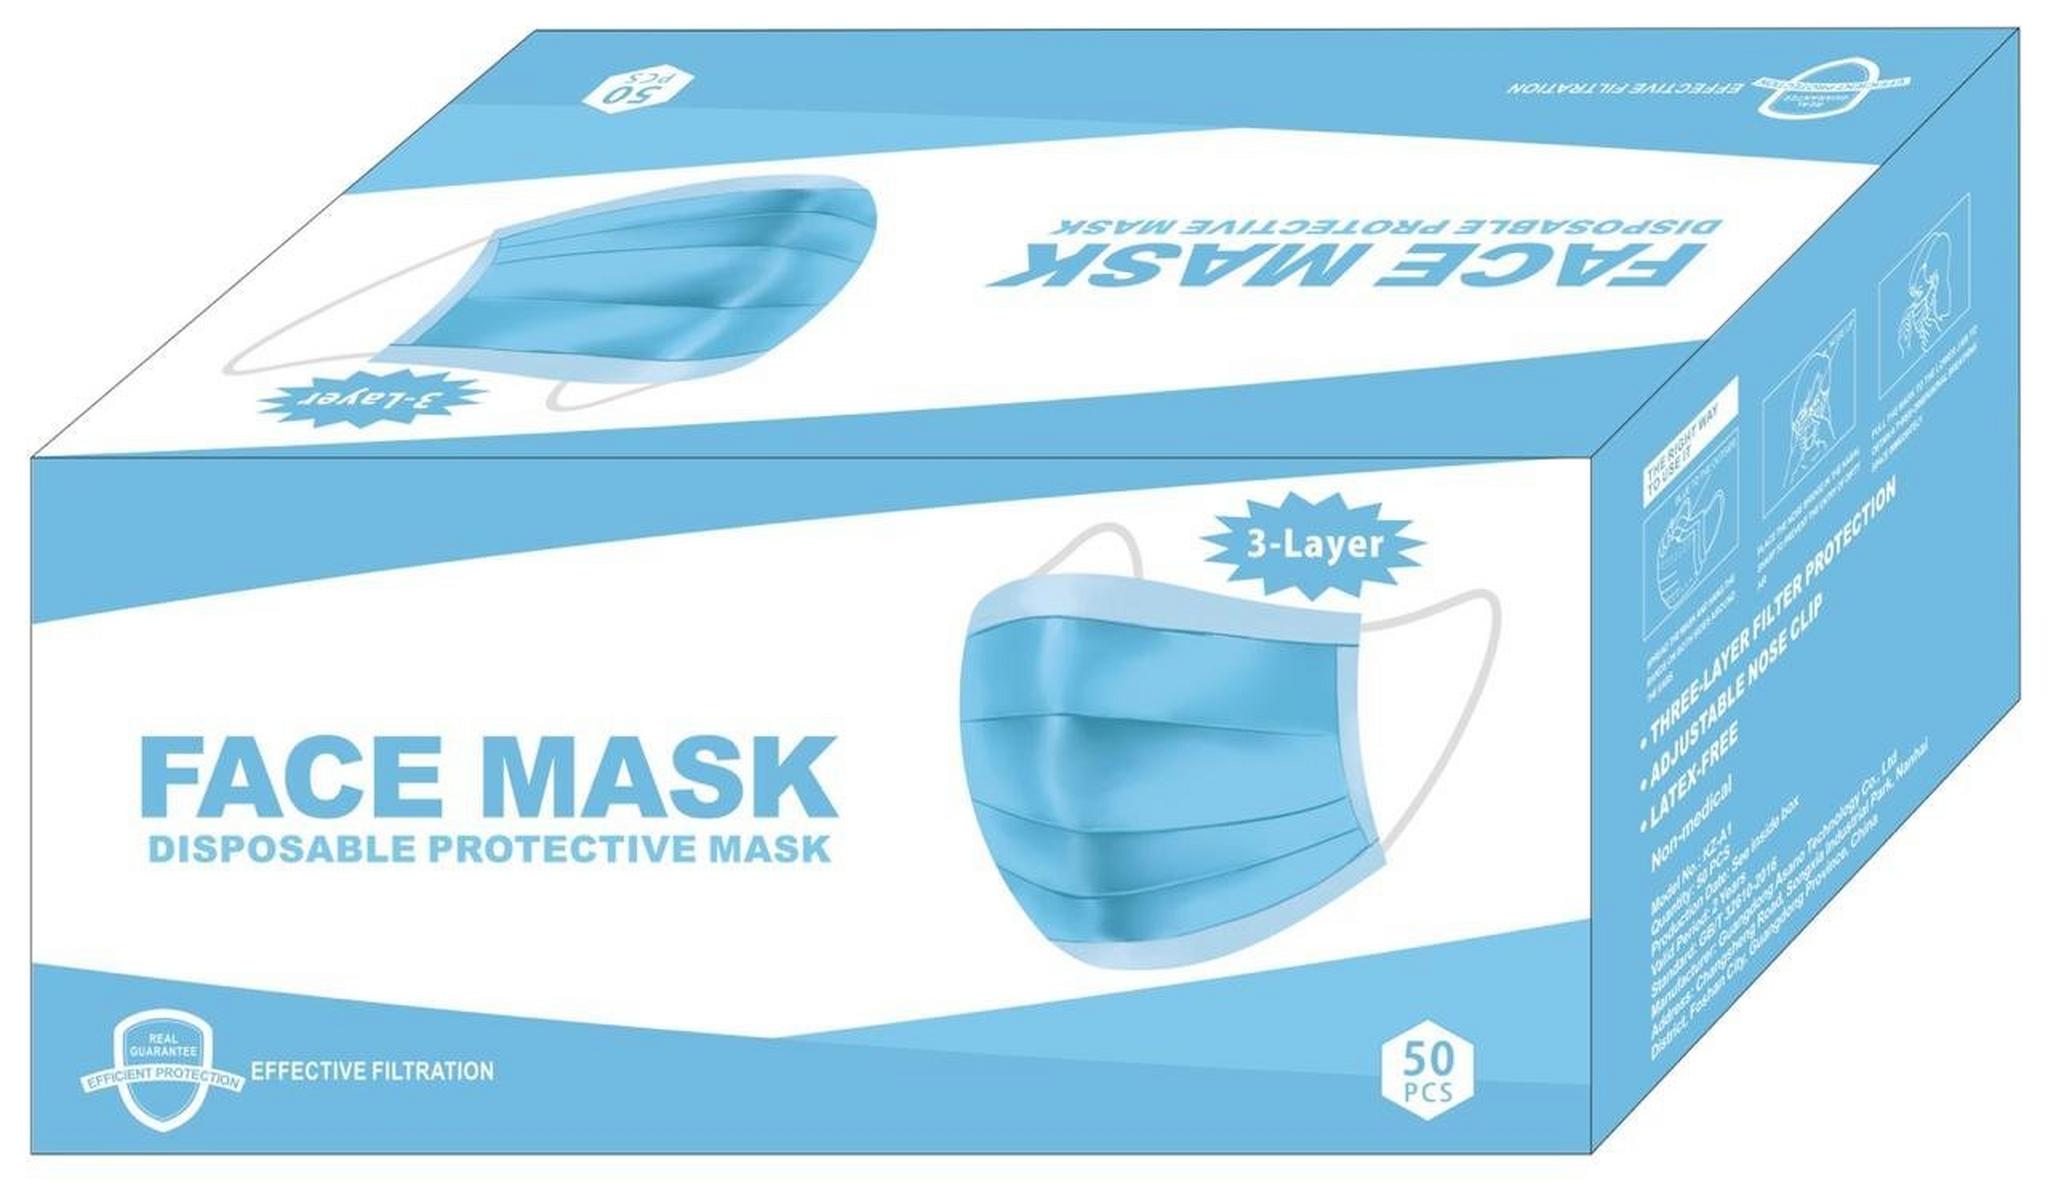 3 - Layer Disposable Protective Face Mask - 50 Pieces